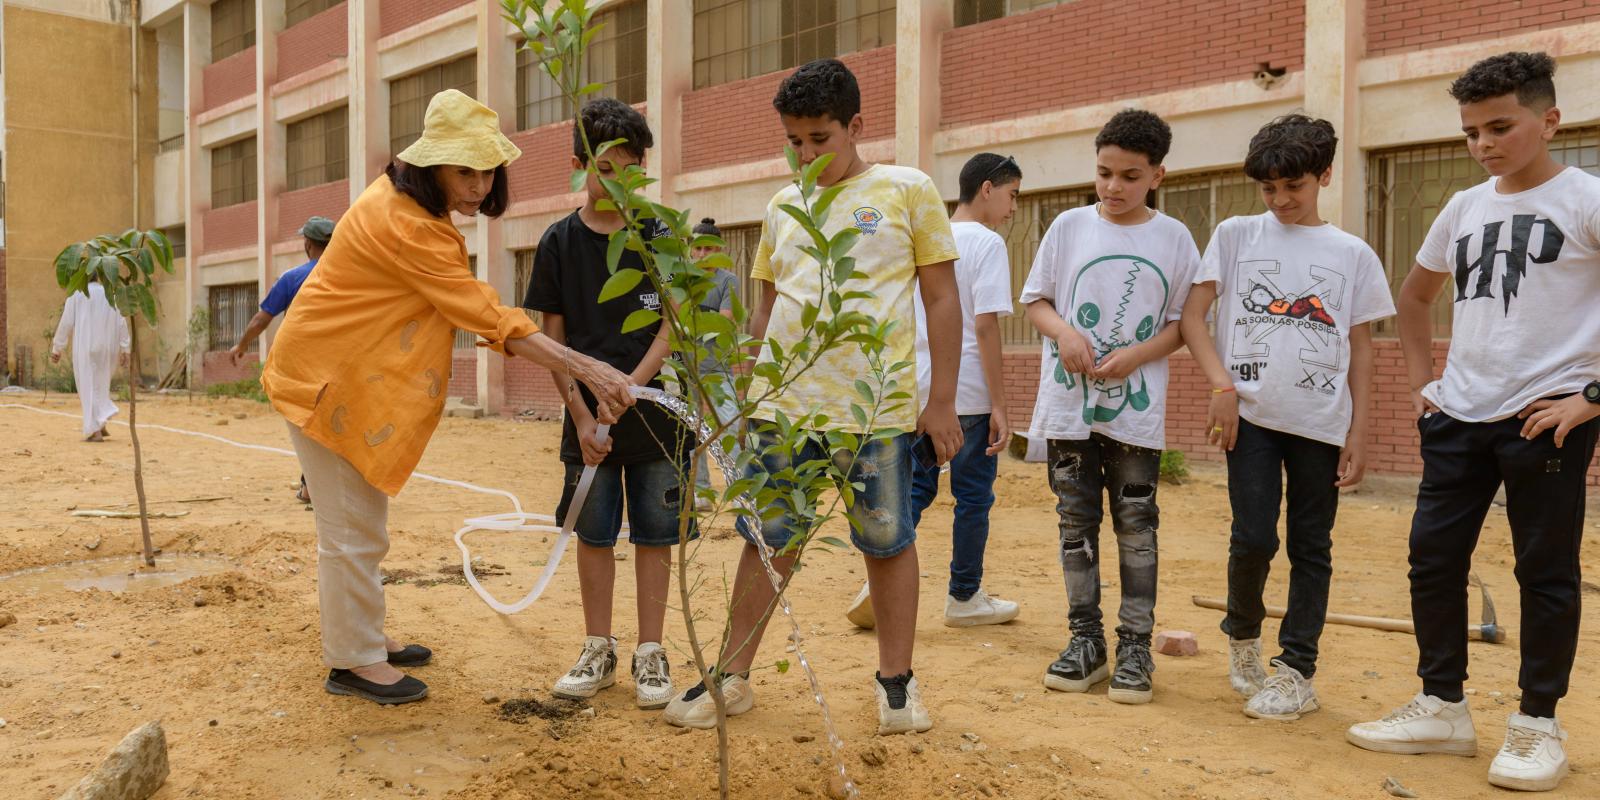 Professor plants trees with public school students in their playground